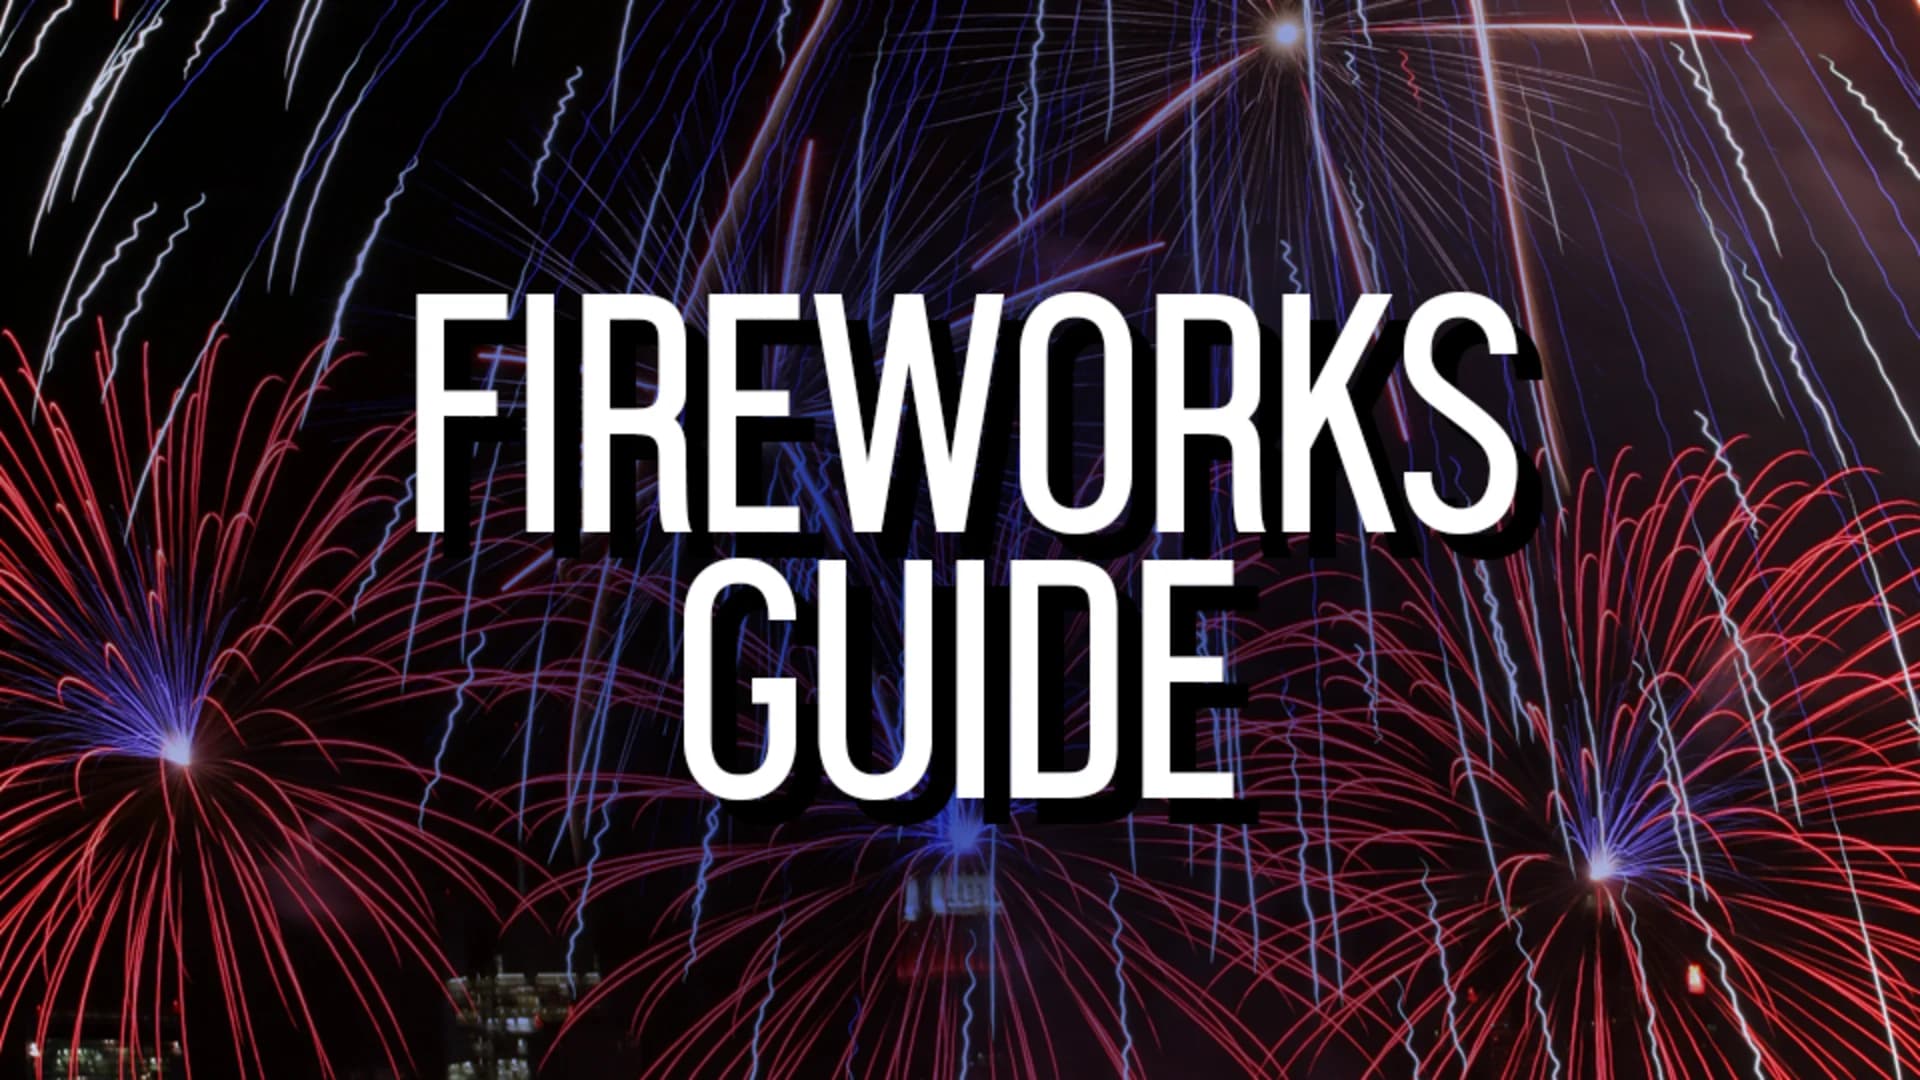 2017 Guide: Where to see fireworks in CT